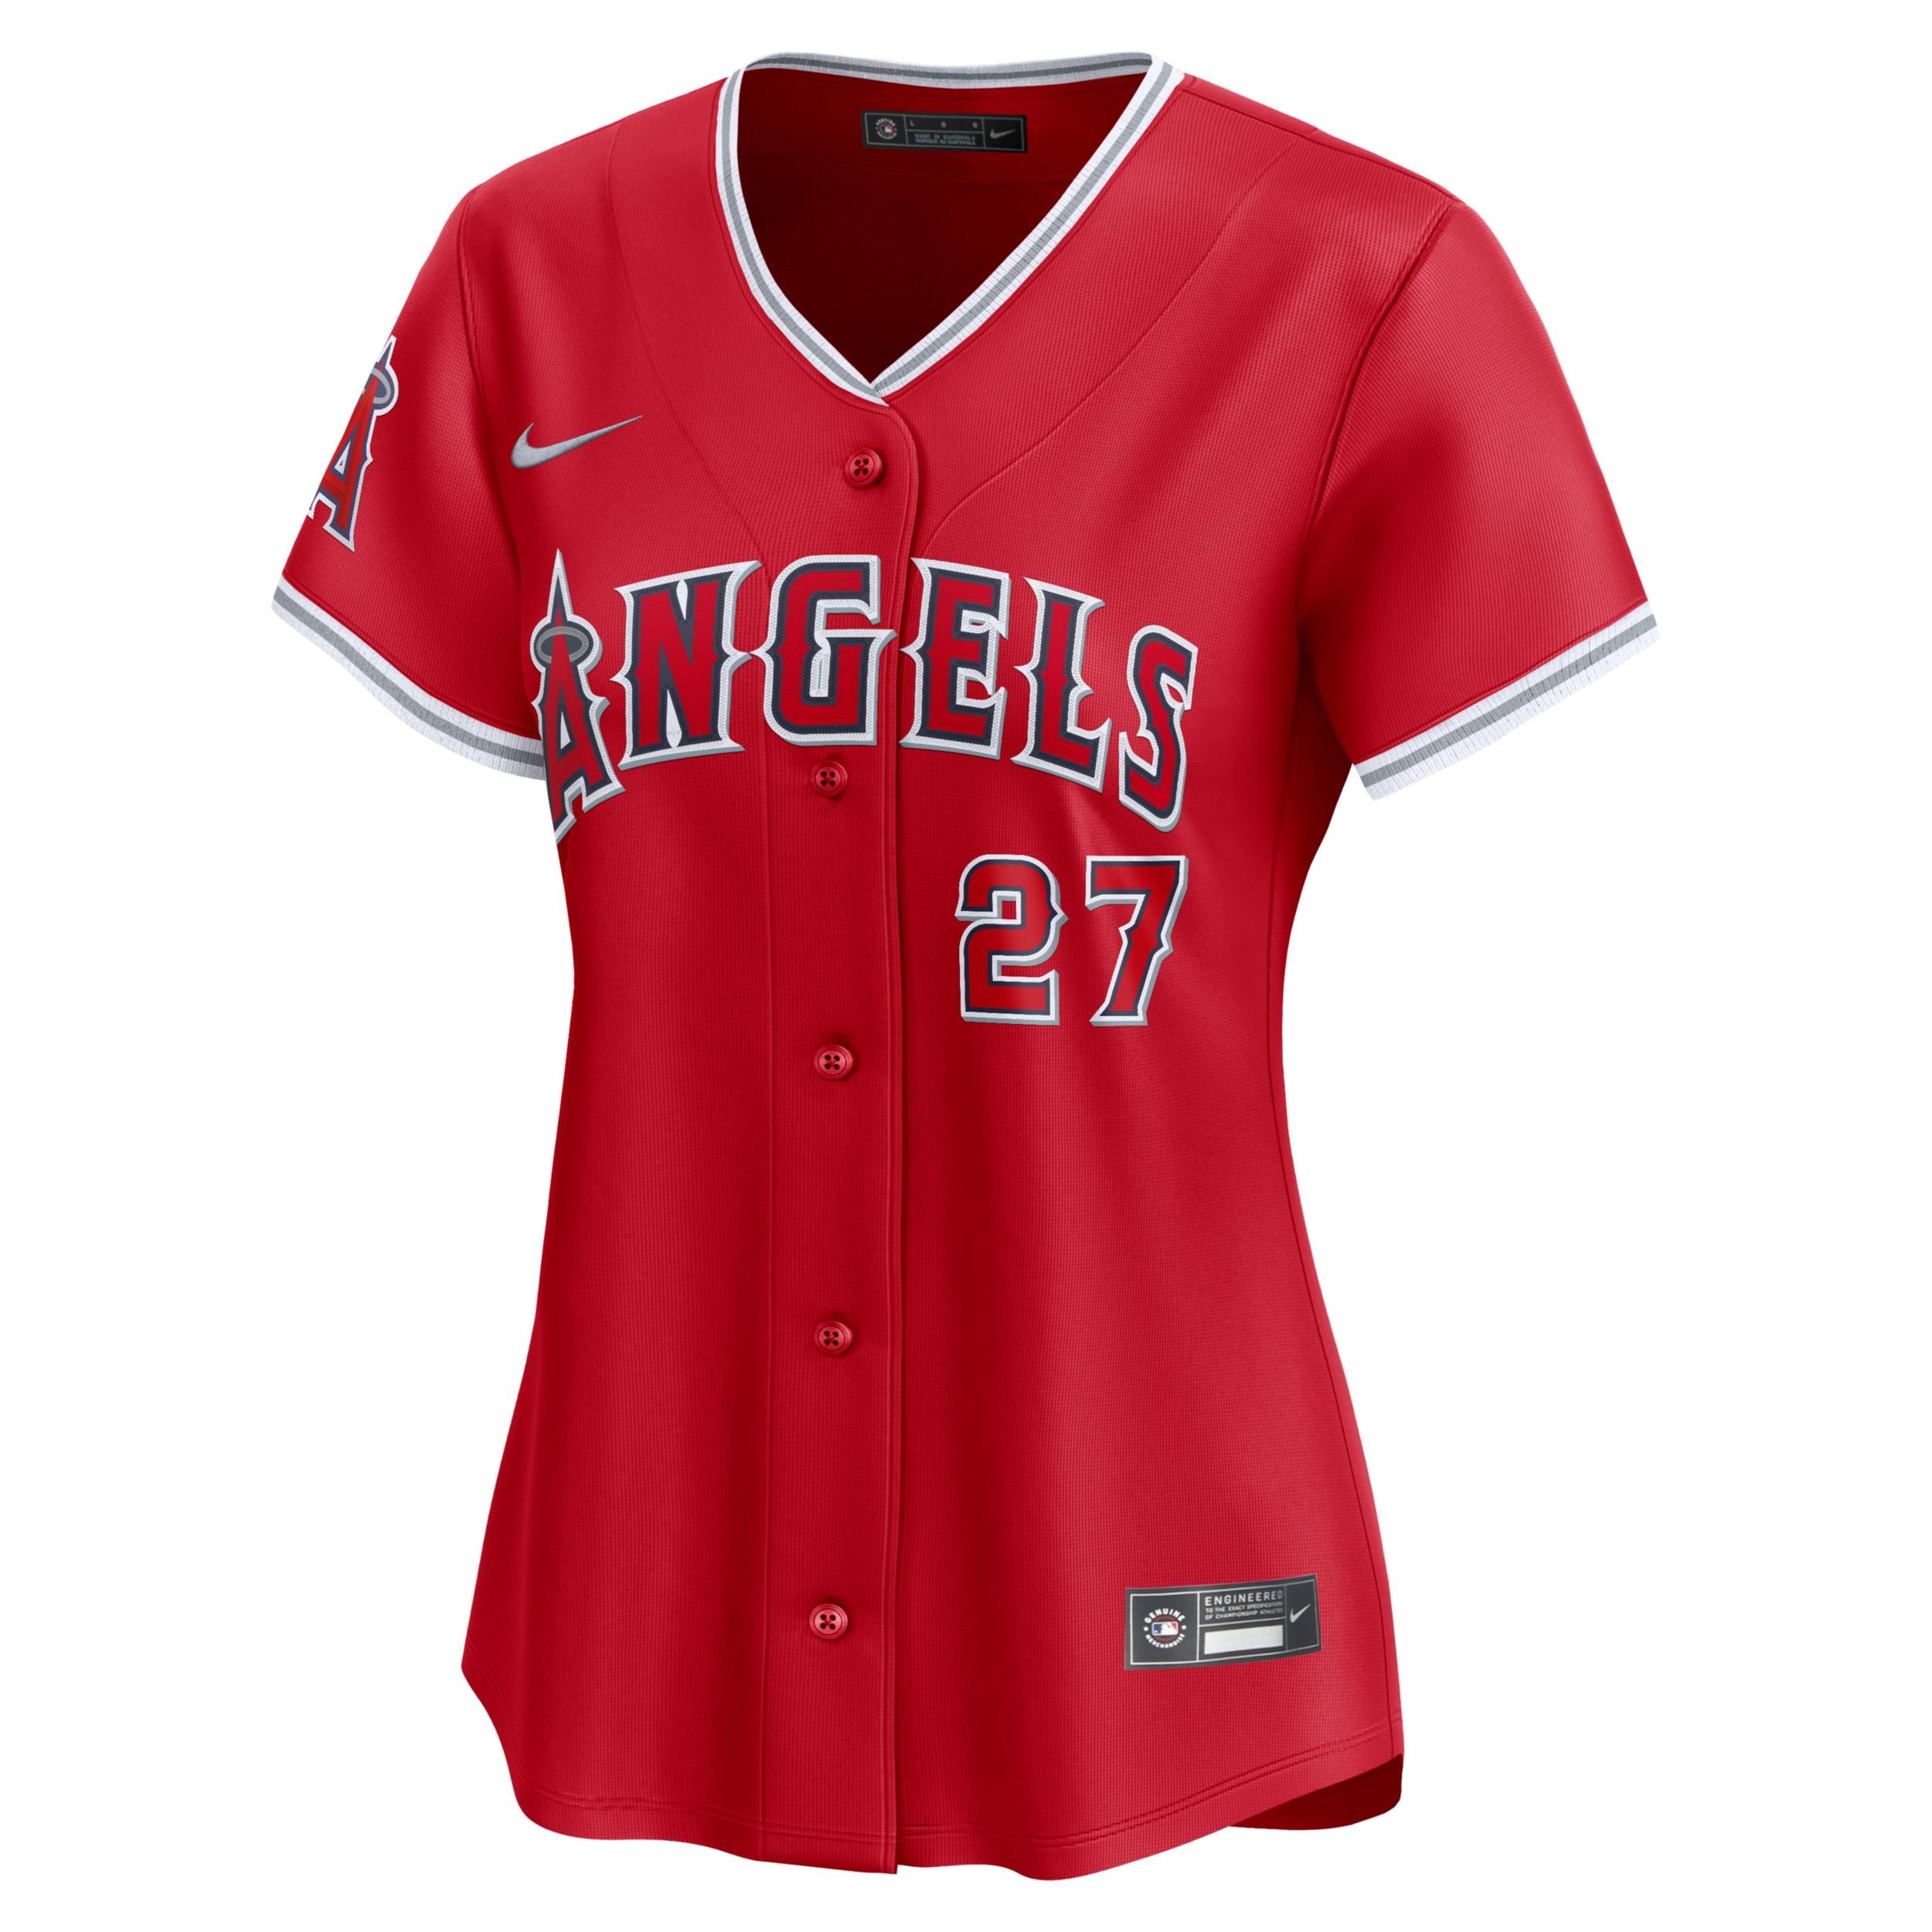 Mike Trout Los Angeles Angels Nike Women's Dri-FIT ADV MLB Limited Jersey by NIKE